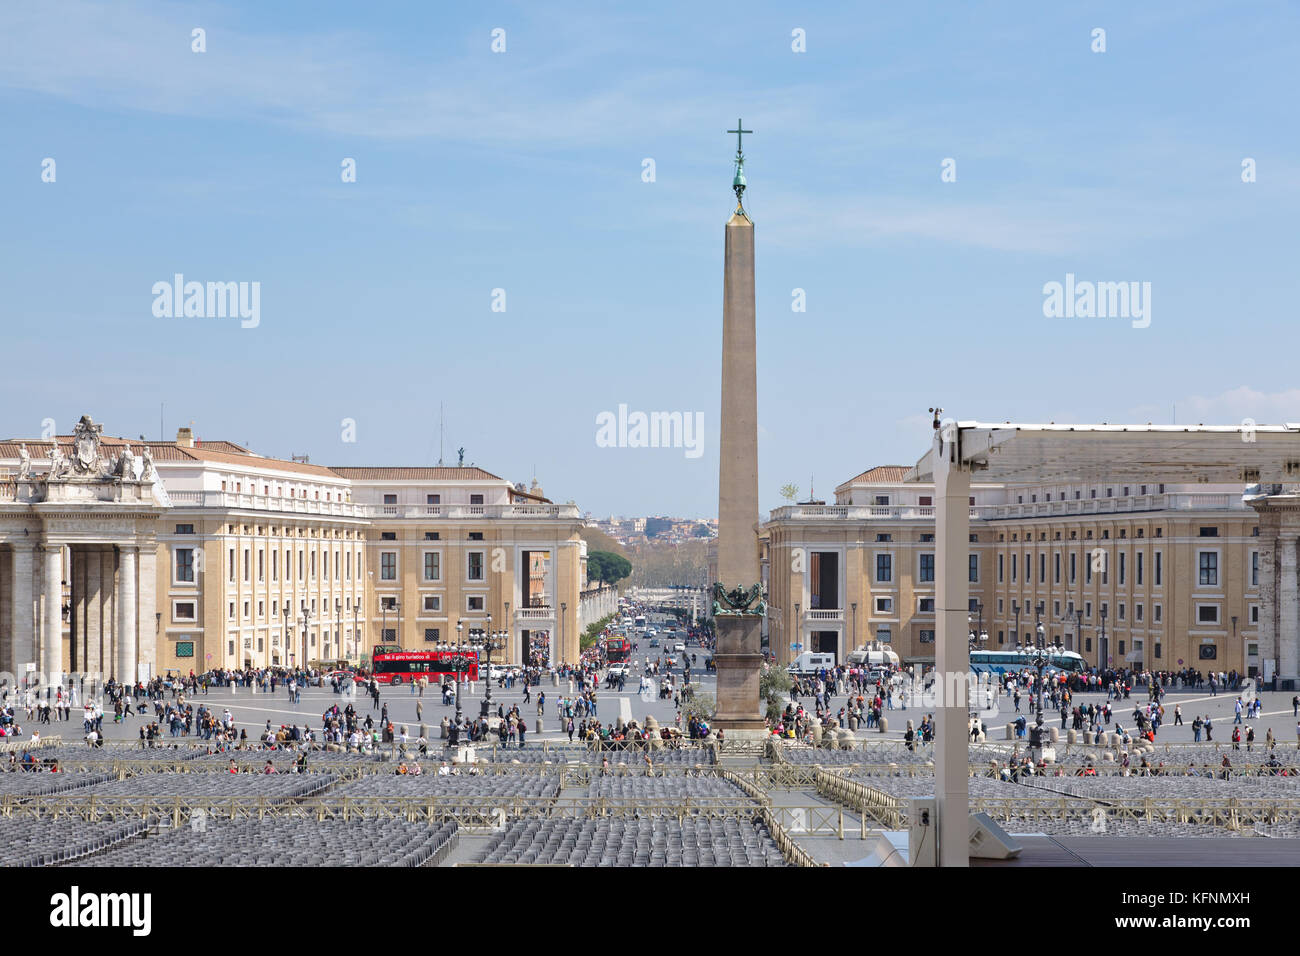 View of St Peter's Square, Rome, Italy Stock Photo